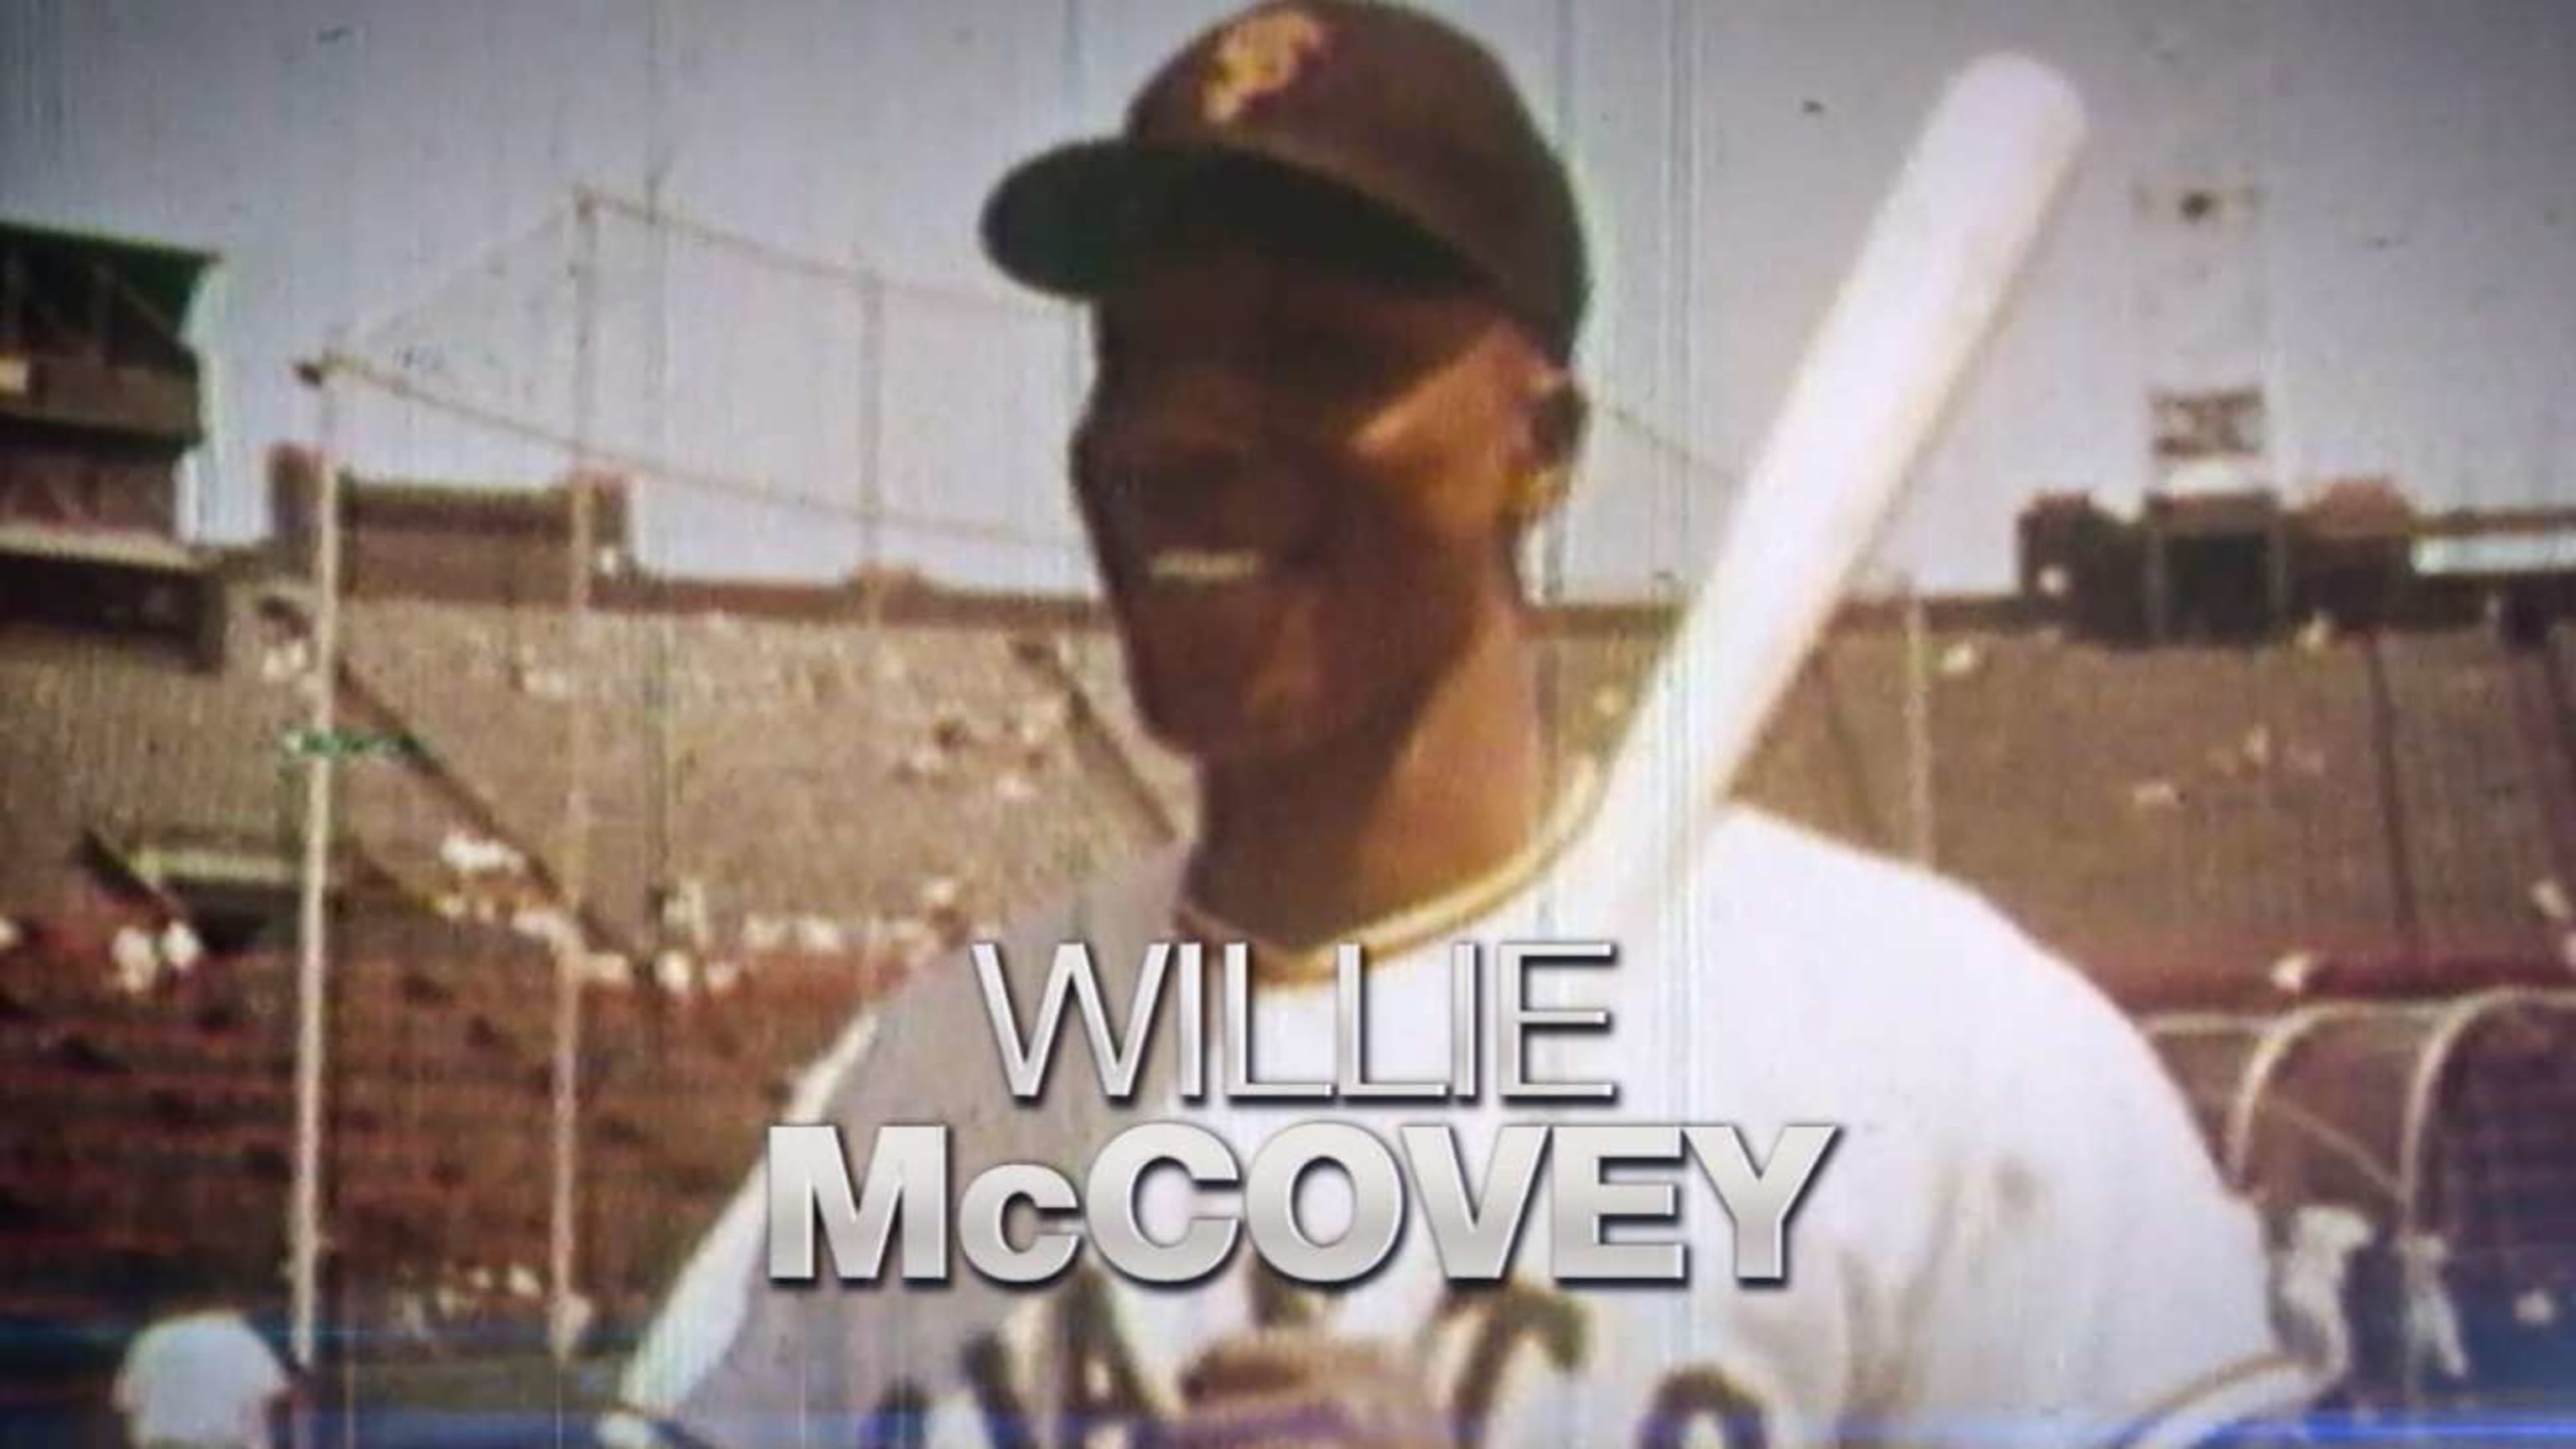 San Francisco Giants legend Willie McCovey dies at 80 - ABC7 Los Angeles